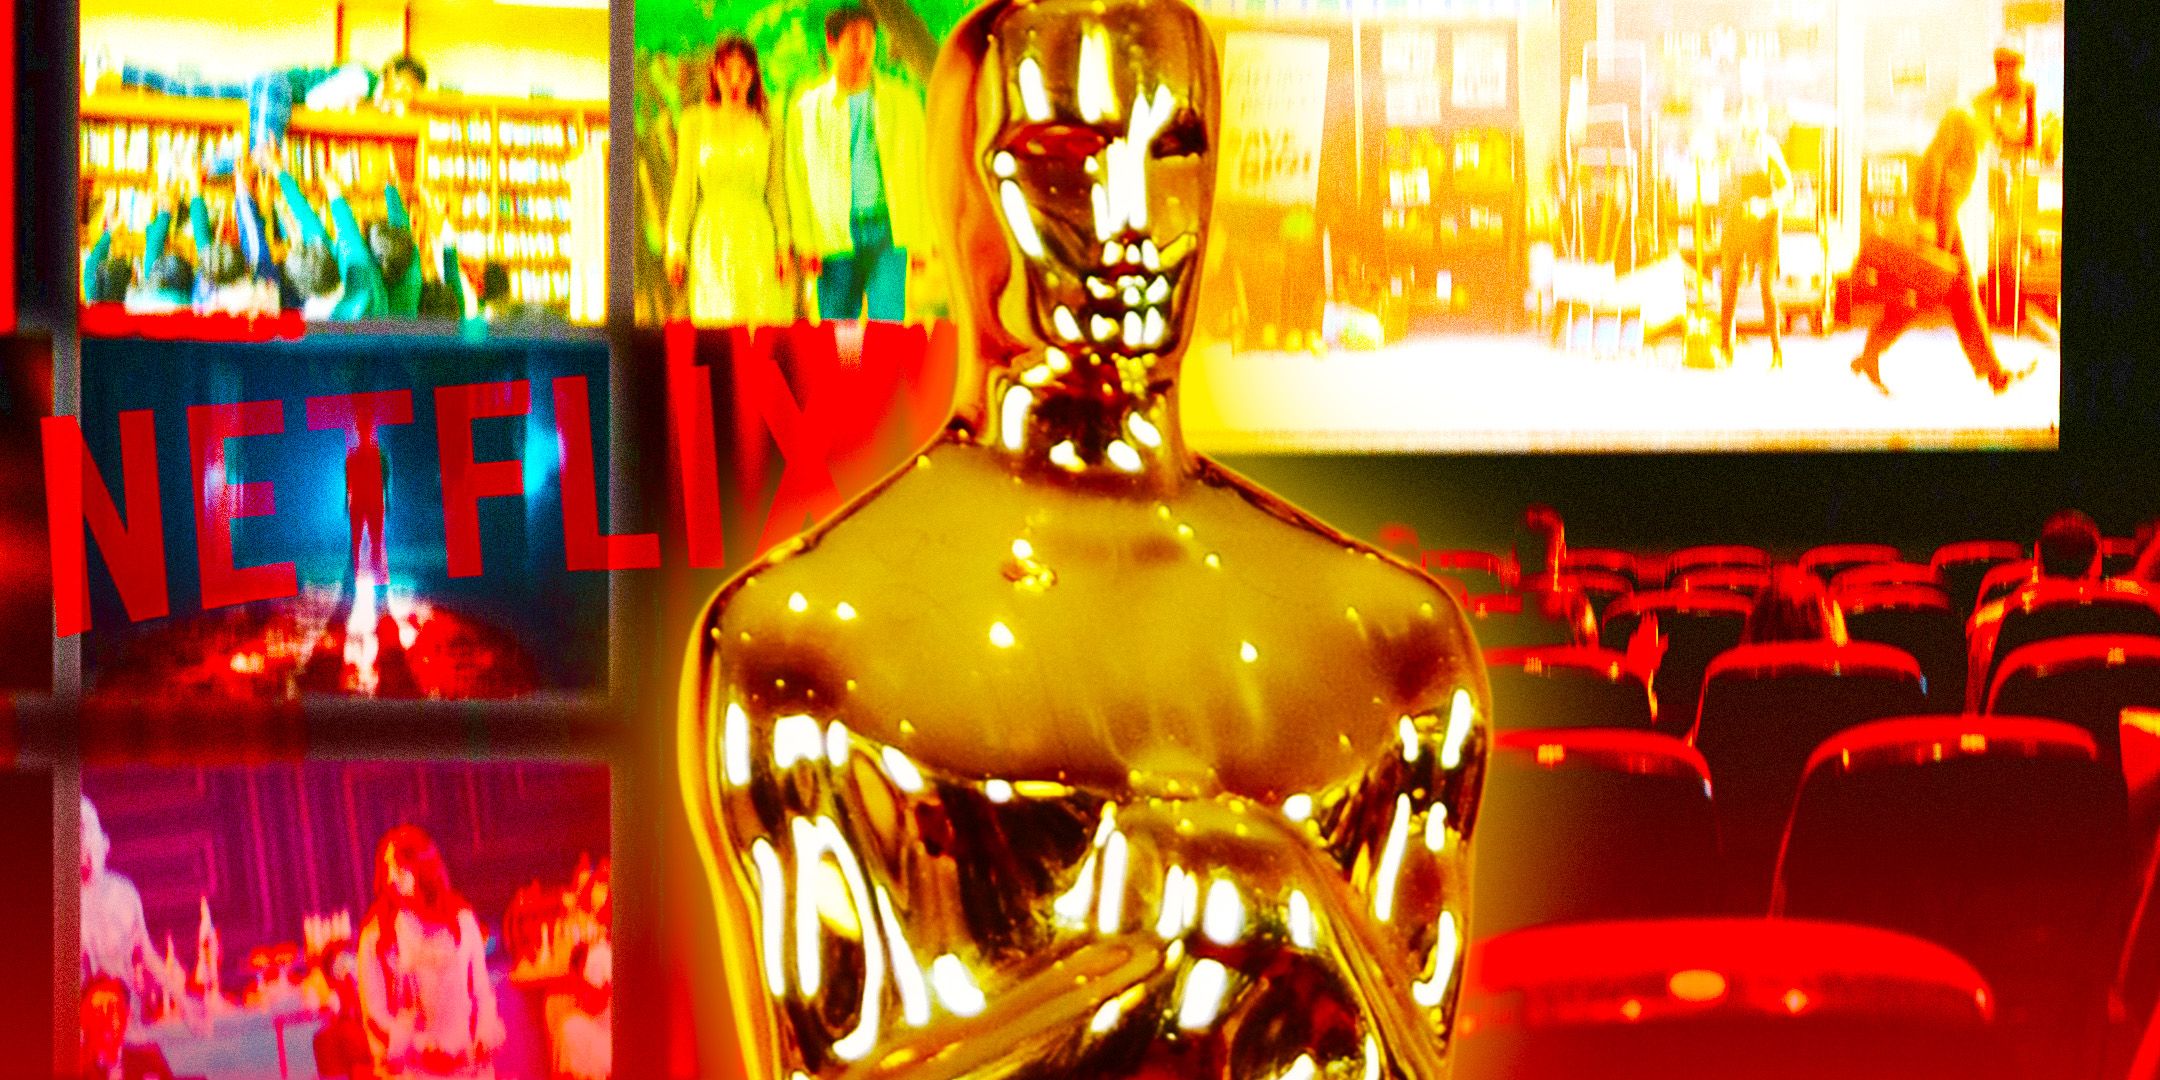 The Oscars' Big New Rule Change Is Great News For Movies (Even If It's Bad For Netflix)